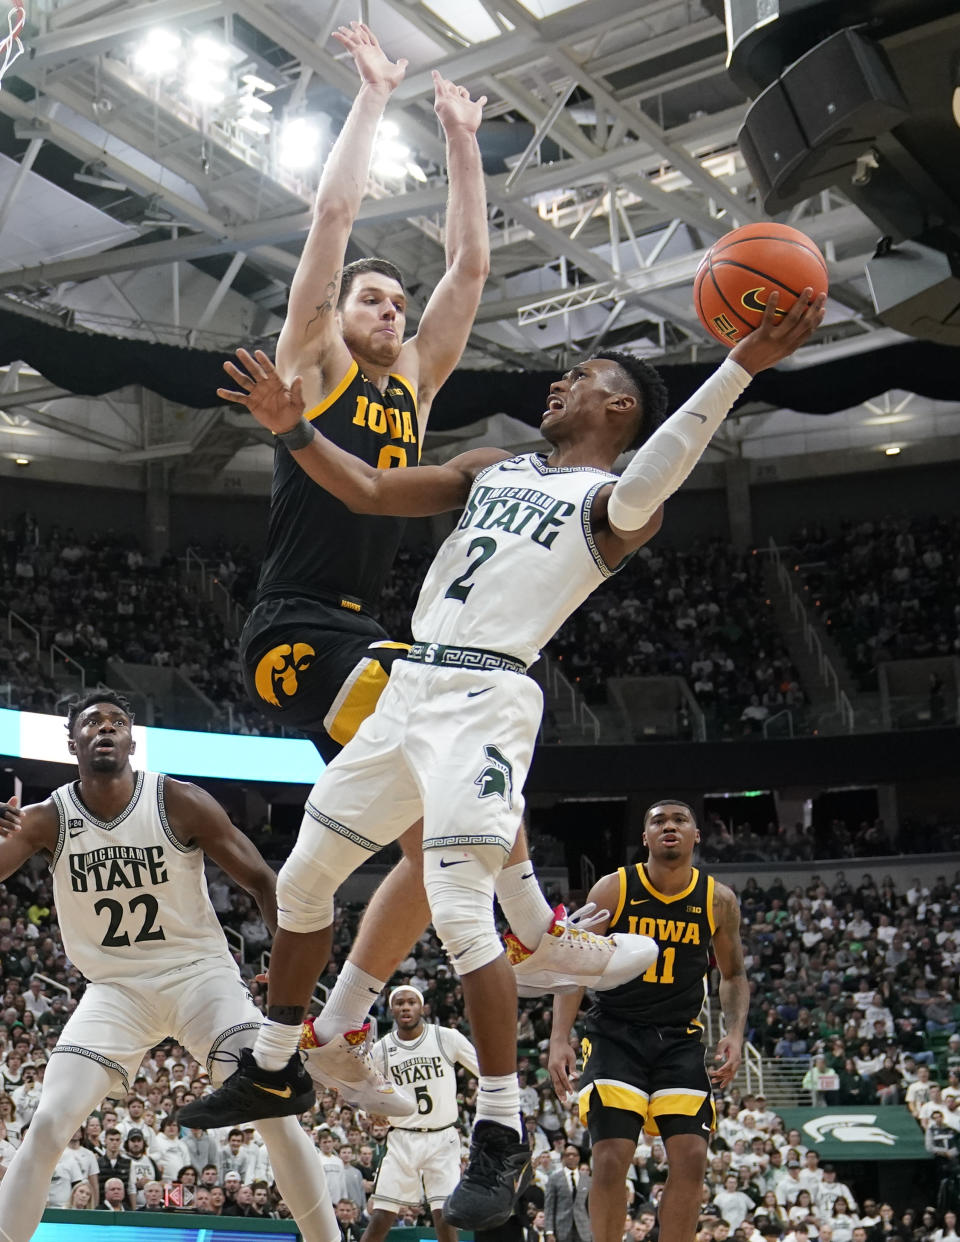 Michigan State guard Tyson Walker (2) attempts a basket as Iowa forward Filip Rebraca defends during the second half of an NCAA college basketball game, Thursday, Jan. 26, 2023, in East Lansing, Mich. (AP Photo/Carlos Osorio)